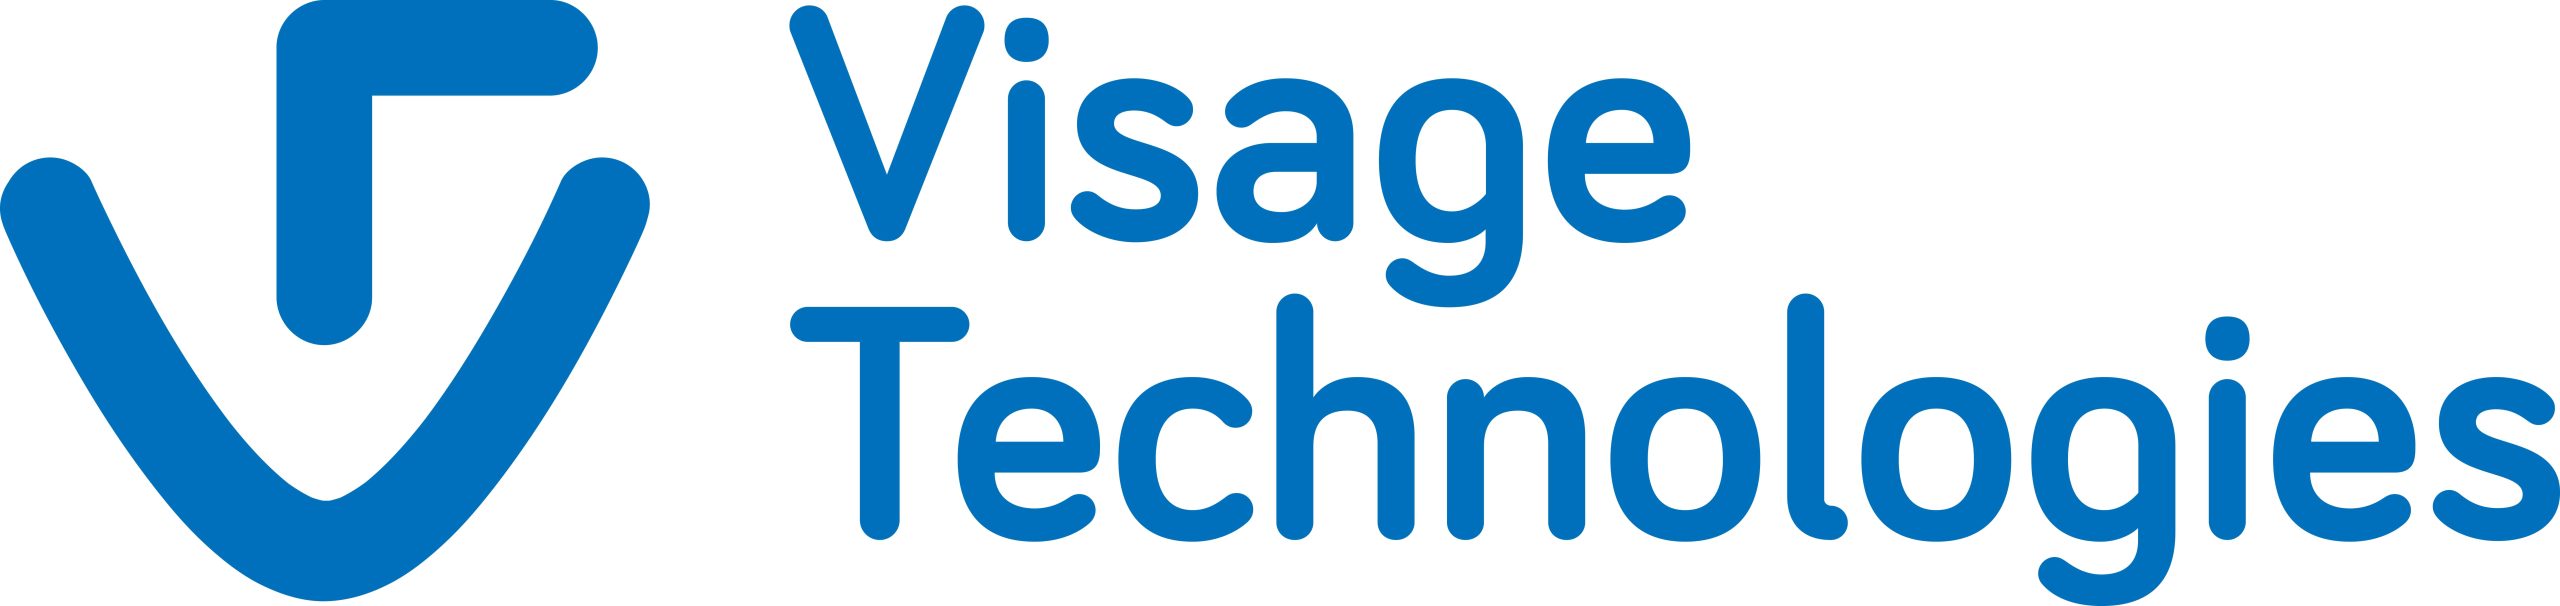 Visage Technologies - Face tracking, analysis and recognition technology